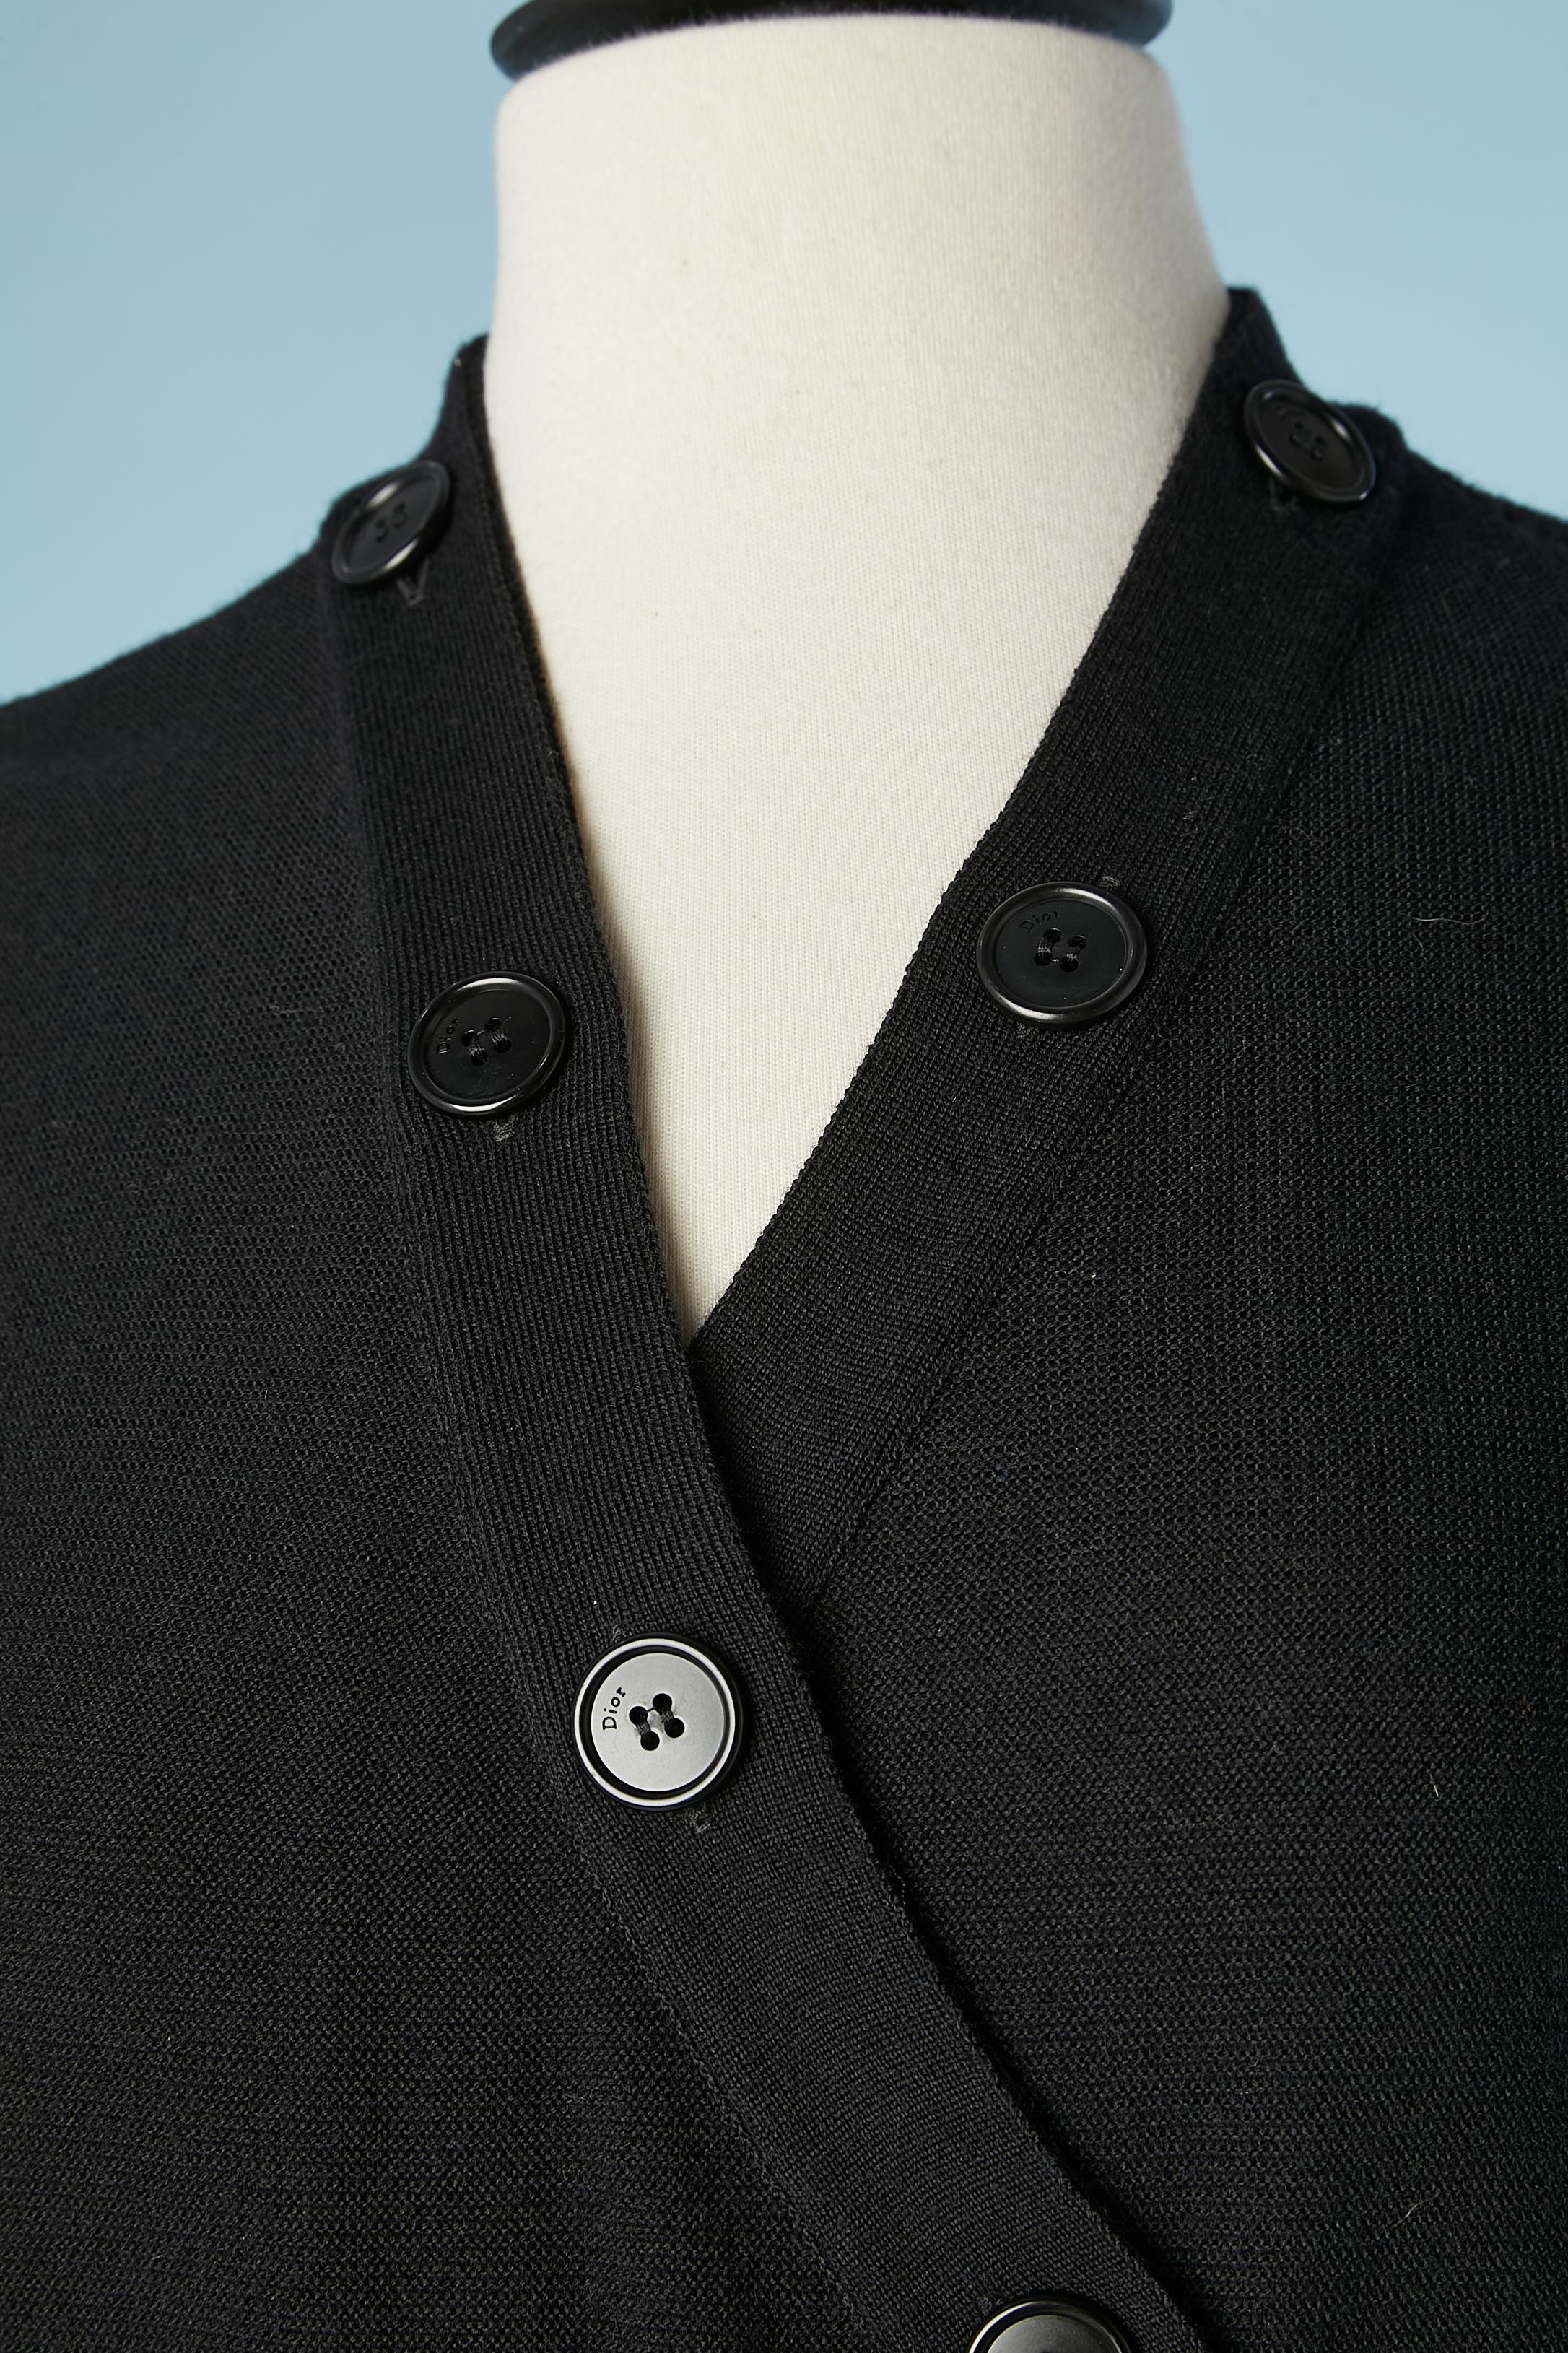 Black knit dress with decorative branded button on the edge . Belt-loop
SIZE 40 (Fr) 8 (Us)